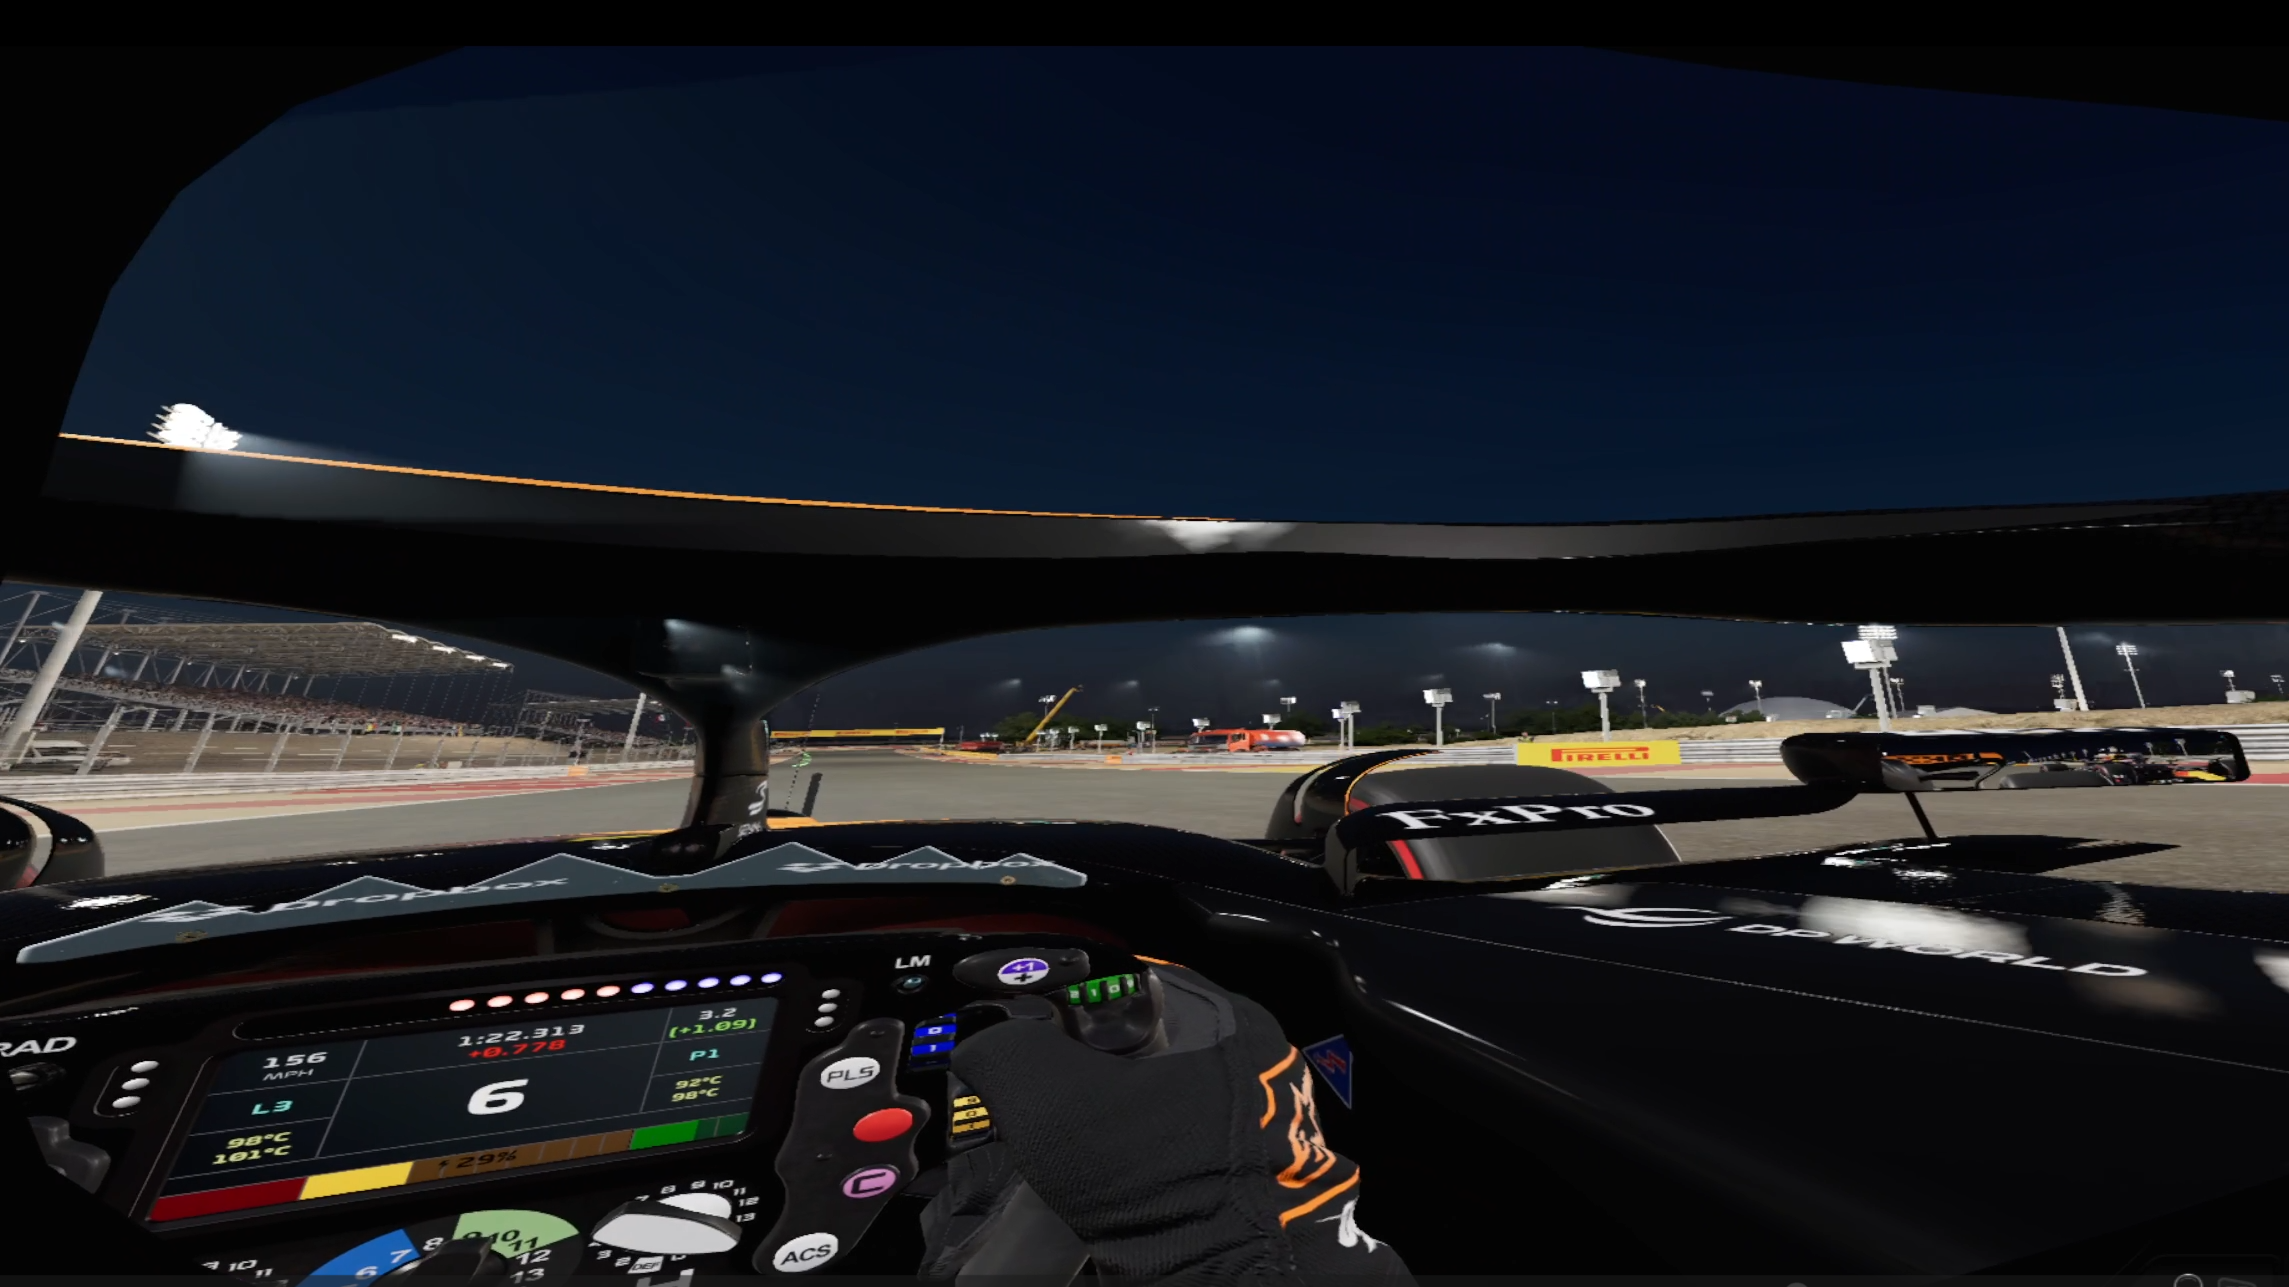 F1 24 screenshot - Driver seeing Max Verstappen's Red Bull in wing mirror